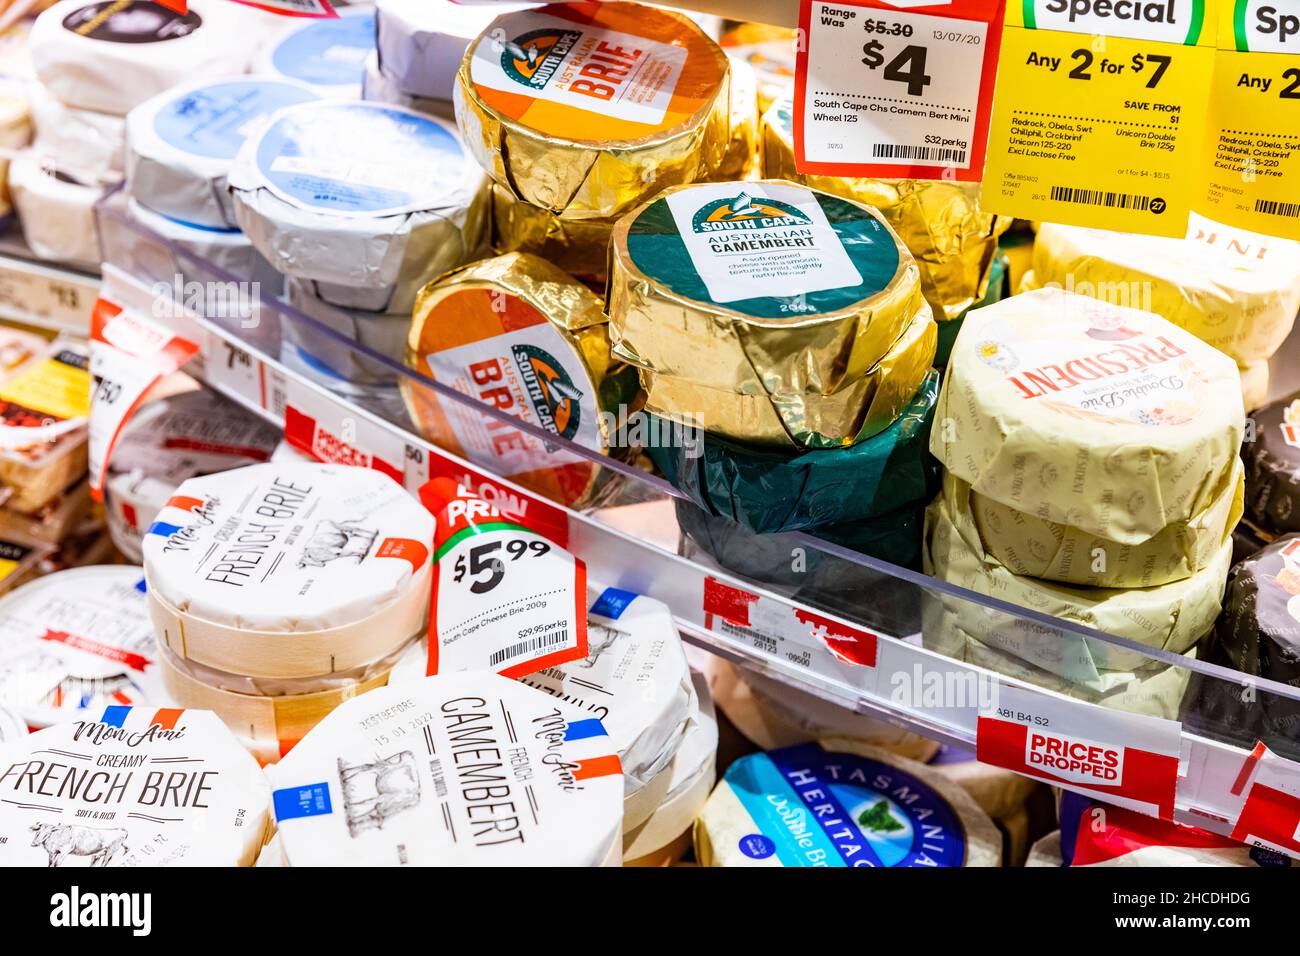 Brie and camembert cheeses by Mon Ami, President, South cape, on display in an Australian supermarket in Sydney, chilled section Stock Photo